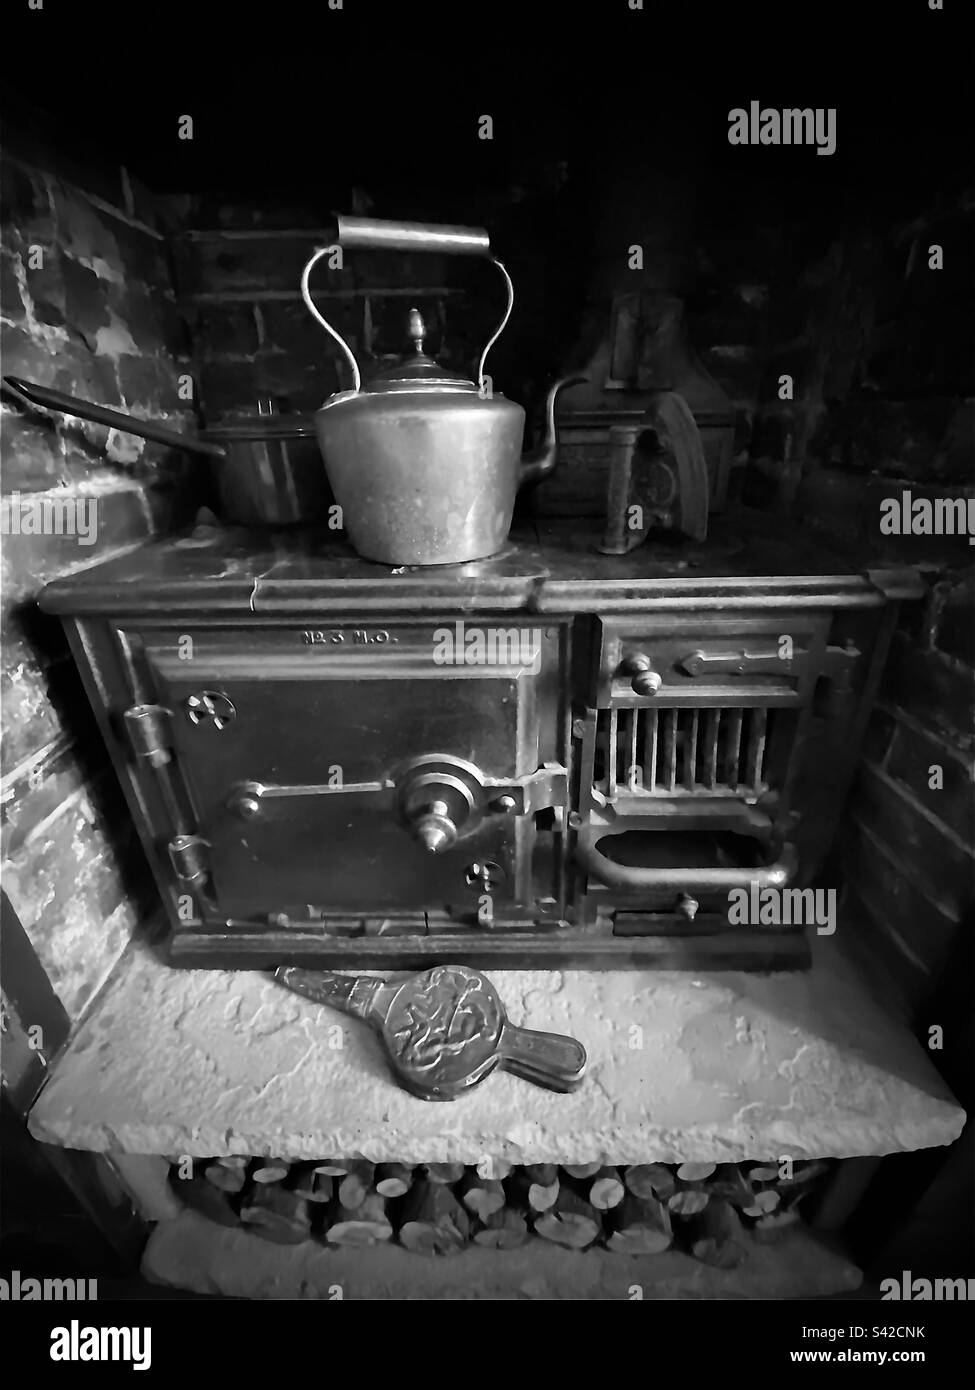 Edwardian cooking range in black and white Stock Photo